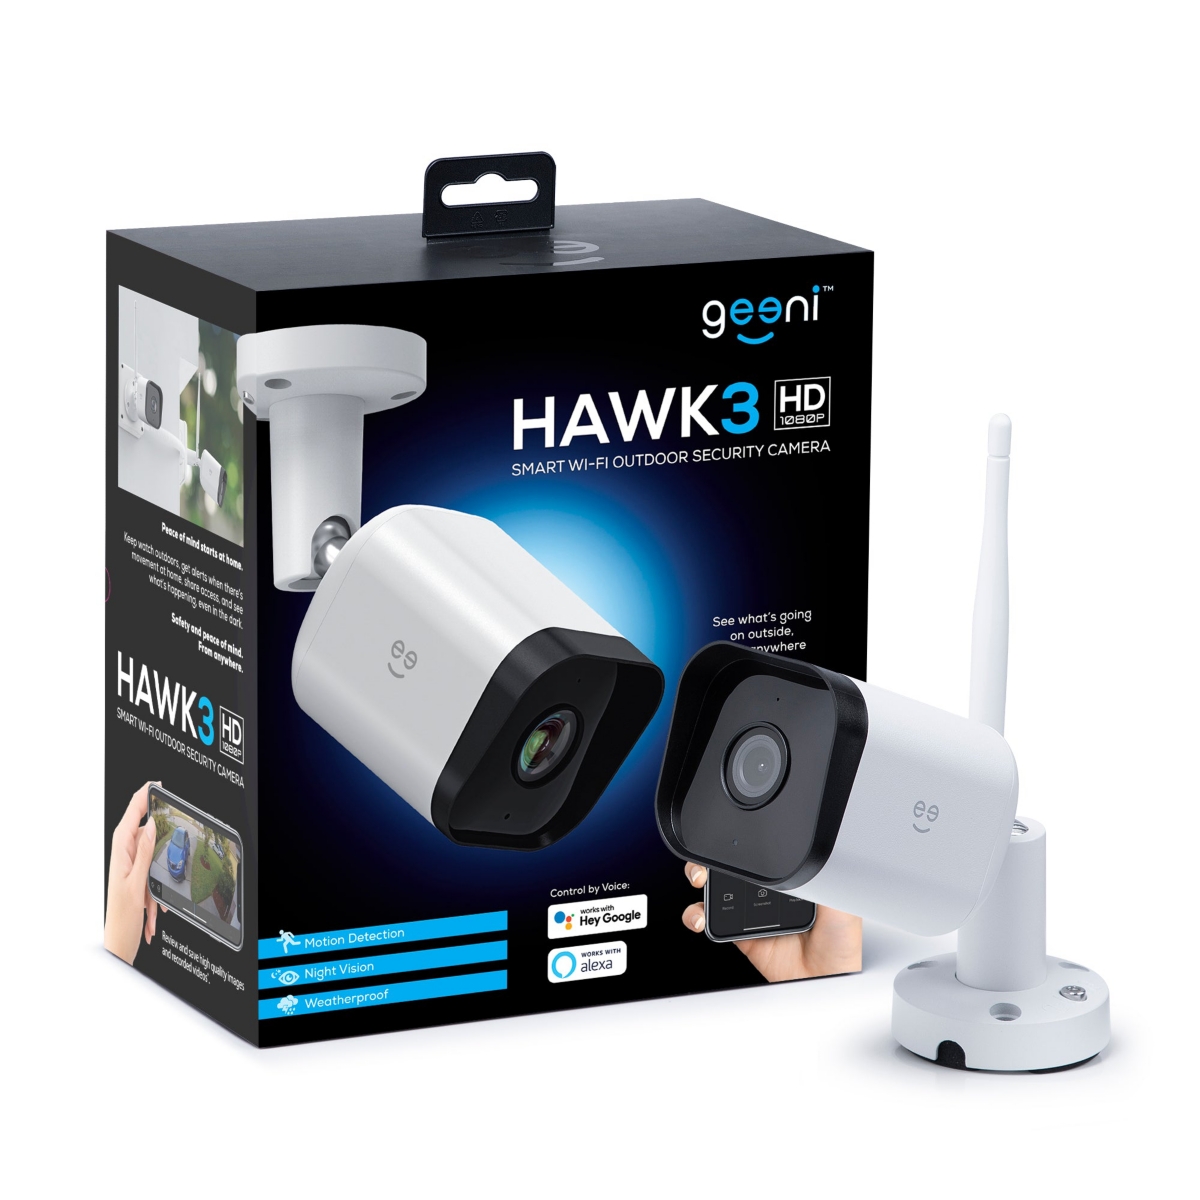 Geeni Hawk 3 Hd 1080p Outdoor Security Camera, Ip66 Weatherproof Wifi Surveillance With Night Vision And M In White